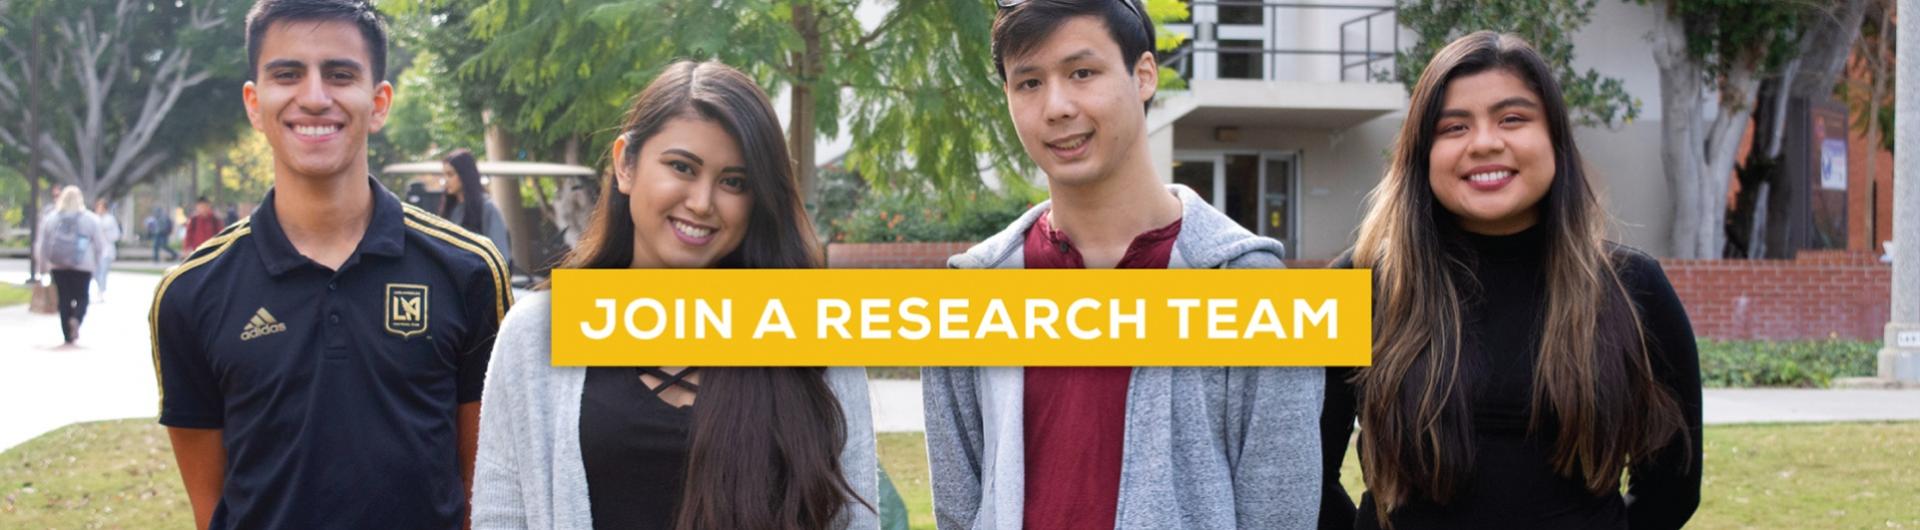 CSULB Research Programs Info Session California State University Long